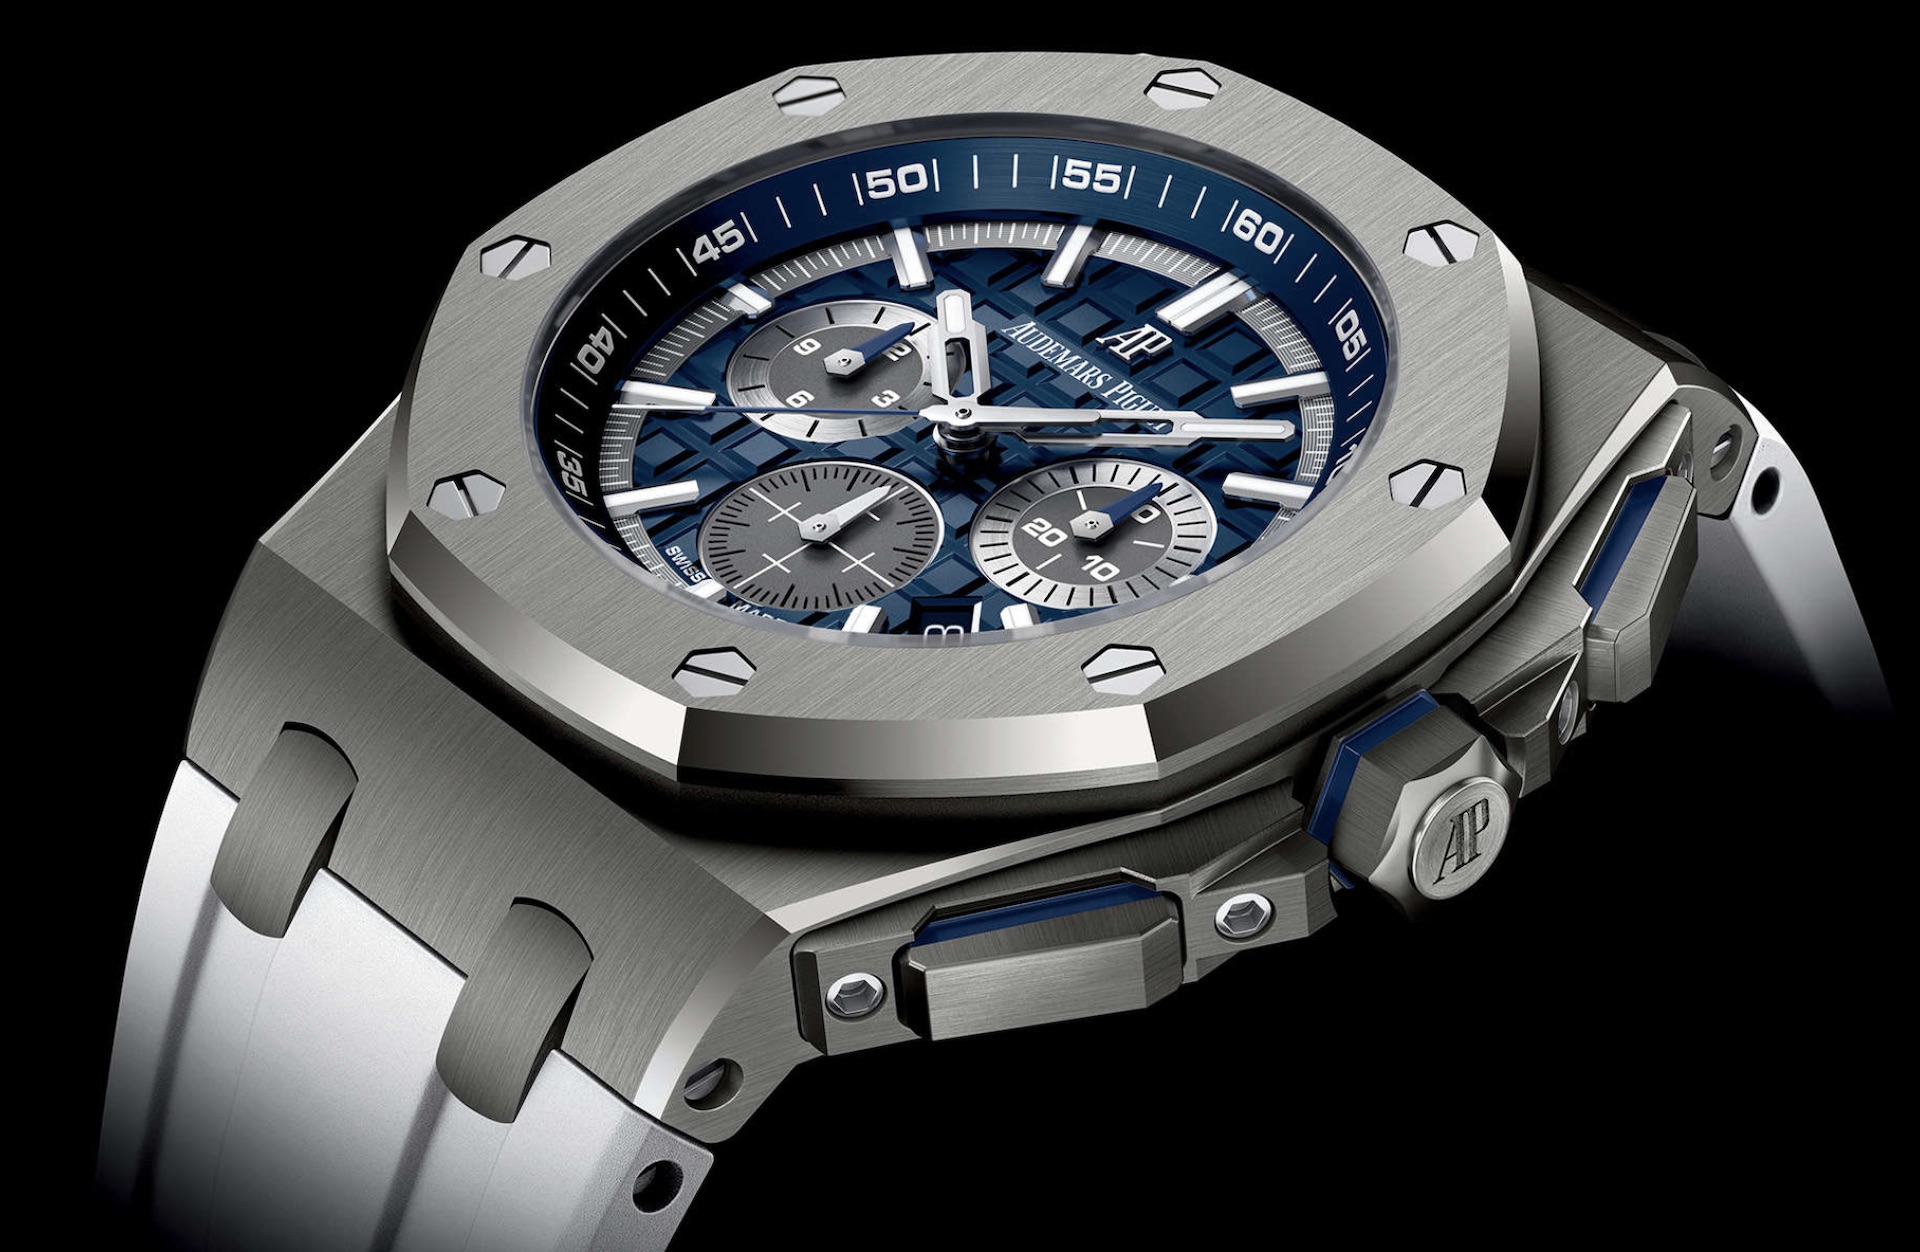 Updated Audemars Piguet Royal Oak Offshore fake Watch In Thinner Titanium Case And New Dial